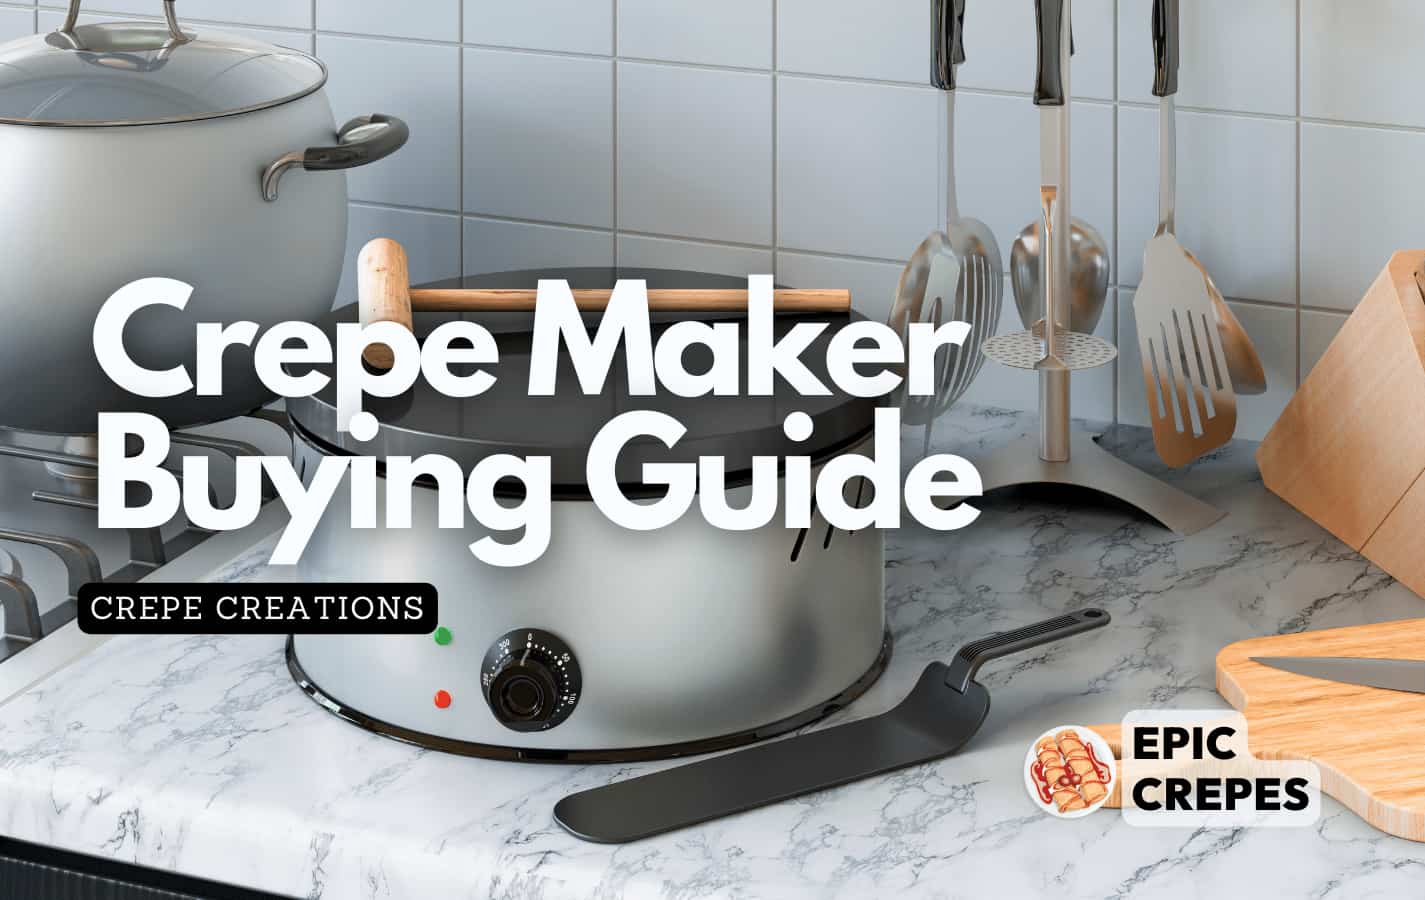 Crepe maker on the kitchen counter with a spreader close by